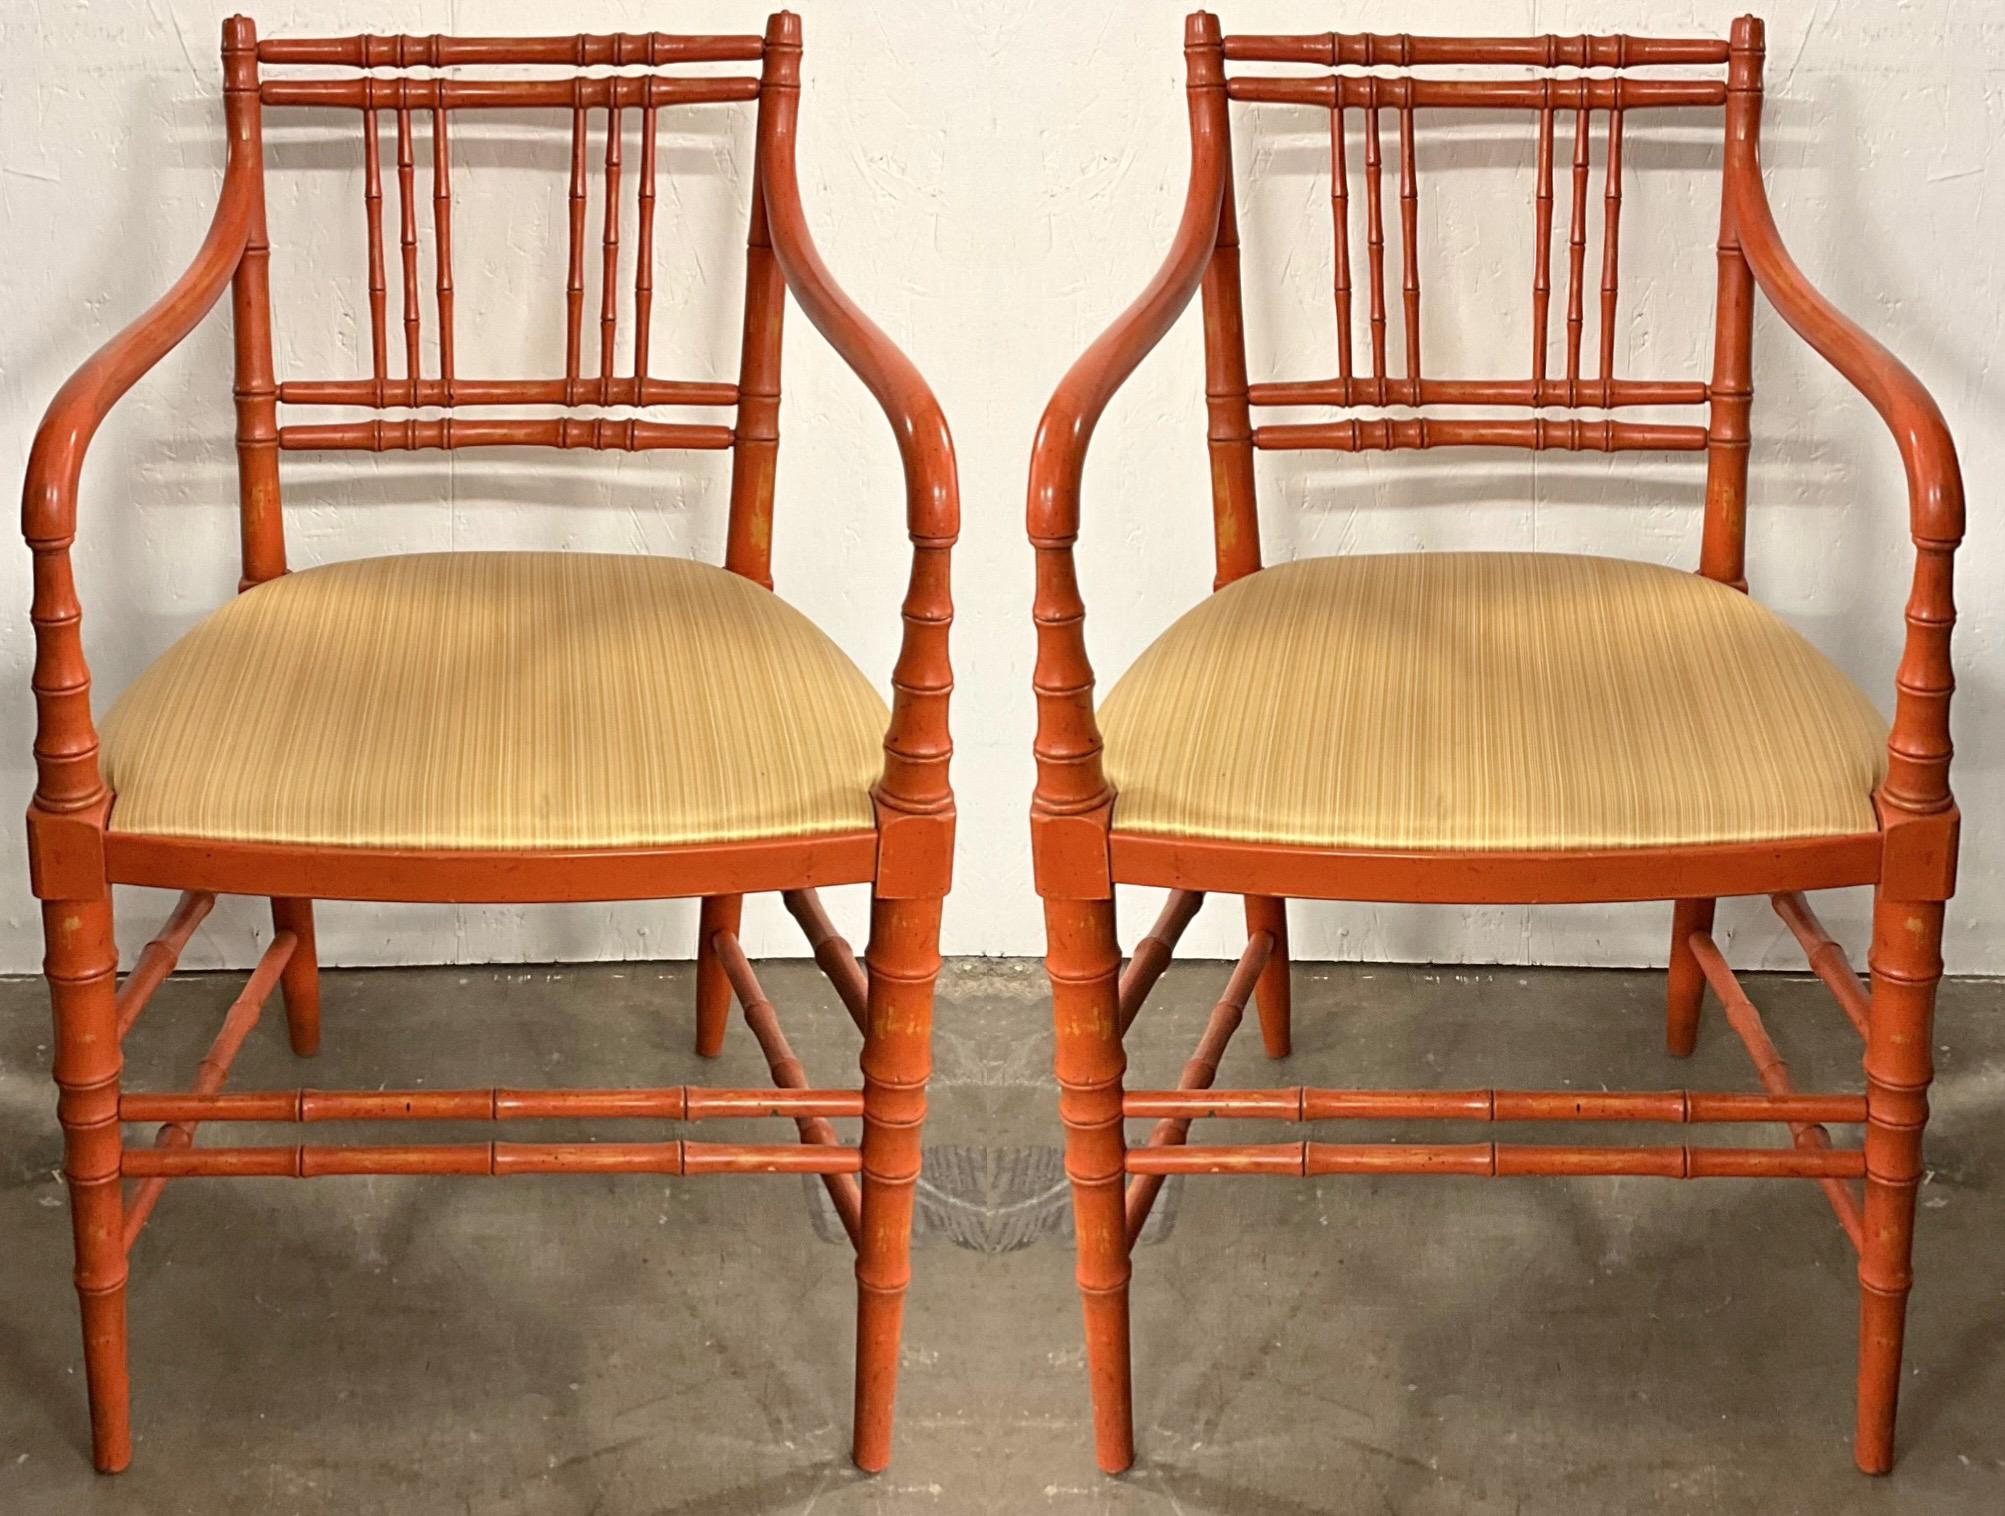 This is a pair of 1950s French style faux bamboo orange painted bergere chairs. The upholstery is vintage and in very good condition. Although the upholstery has the appearance of silk, it is most likely a blend. The seat depth is 18”. 

My shipping